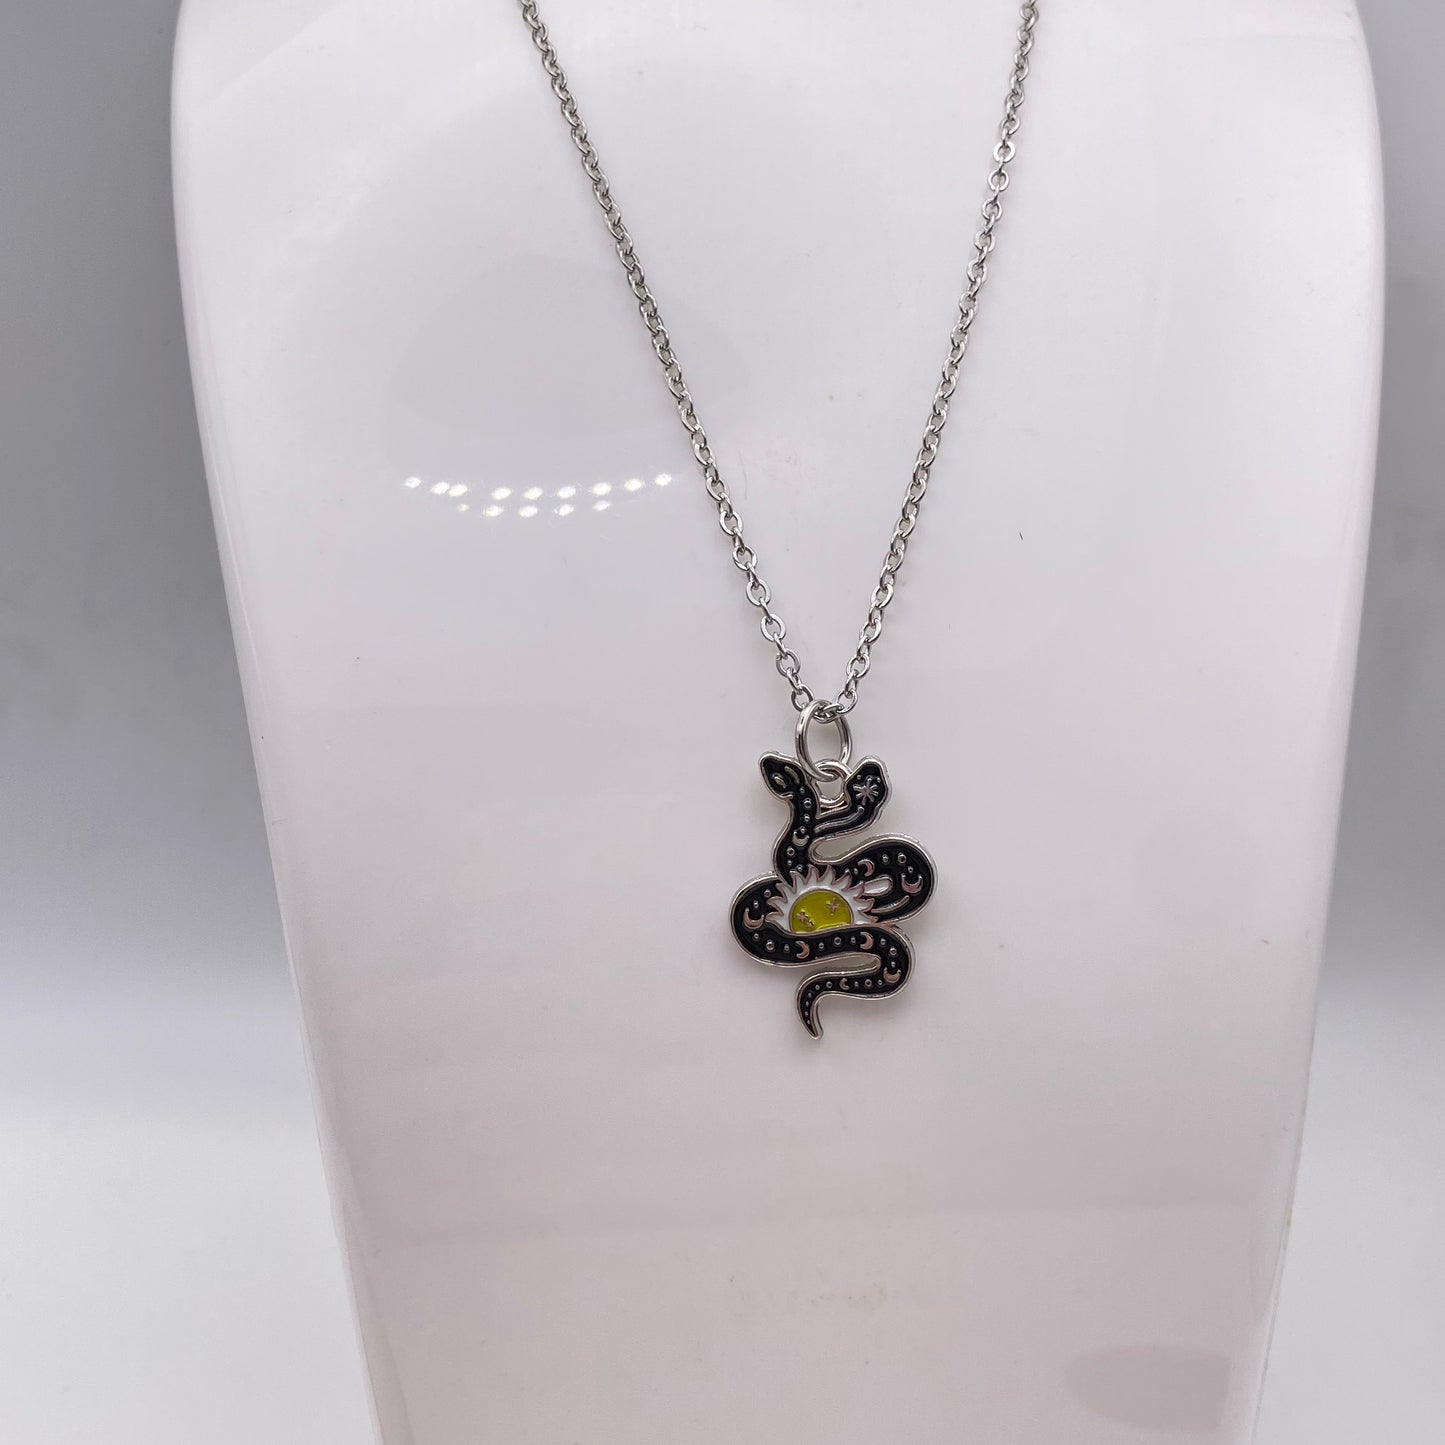 Black Double Snakes Necklace